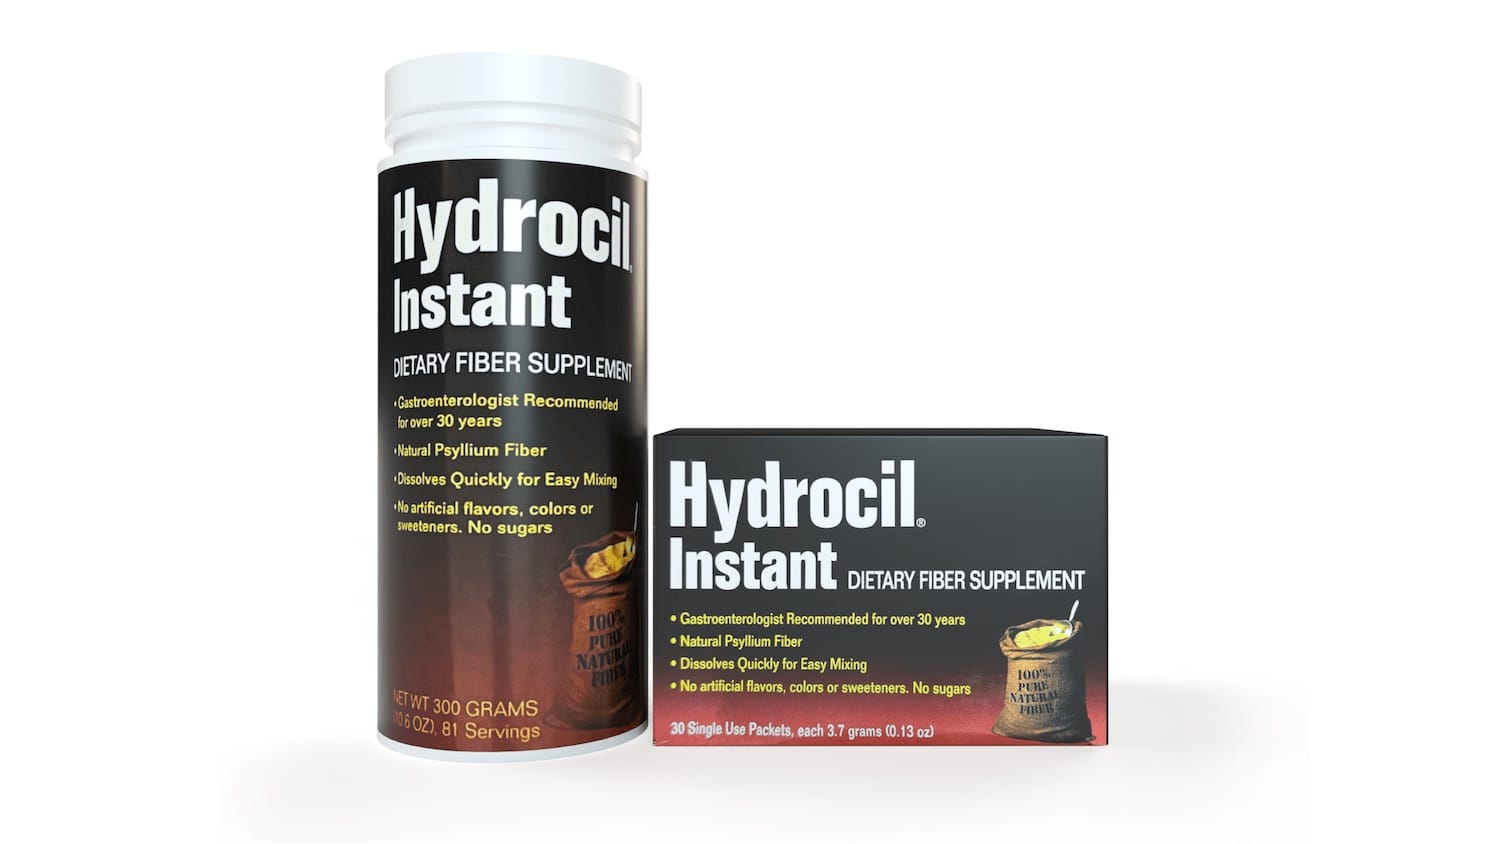 bottle and box of Hydrocil Instant